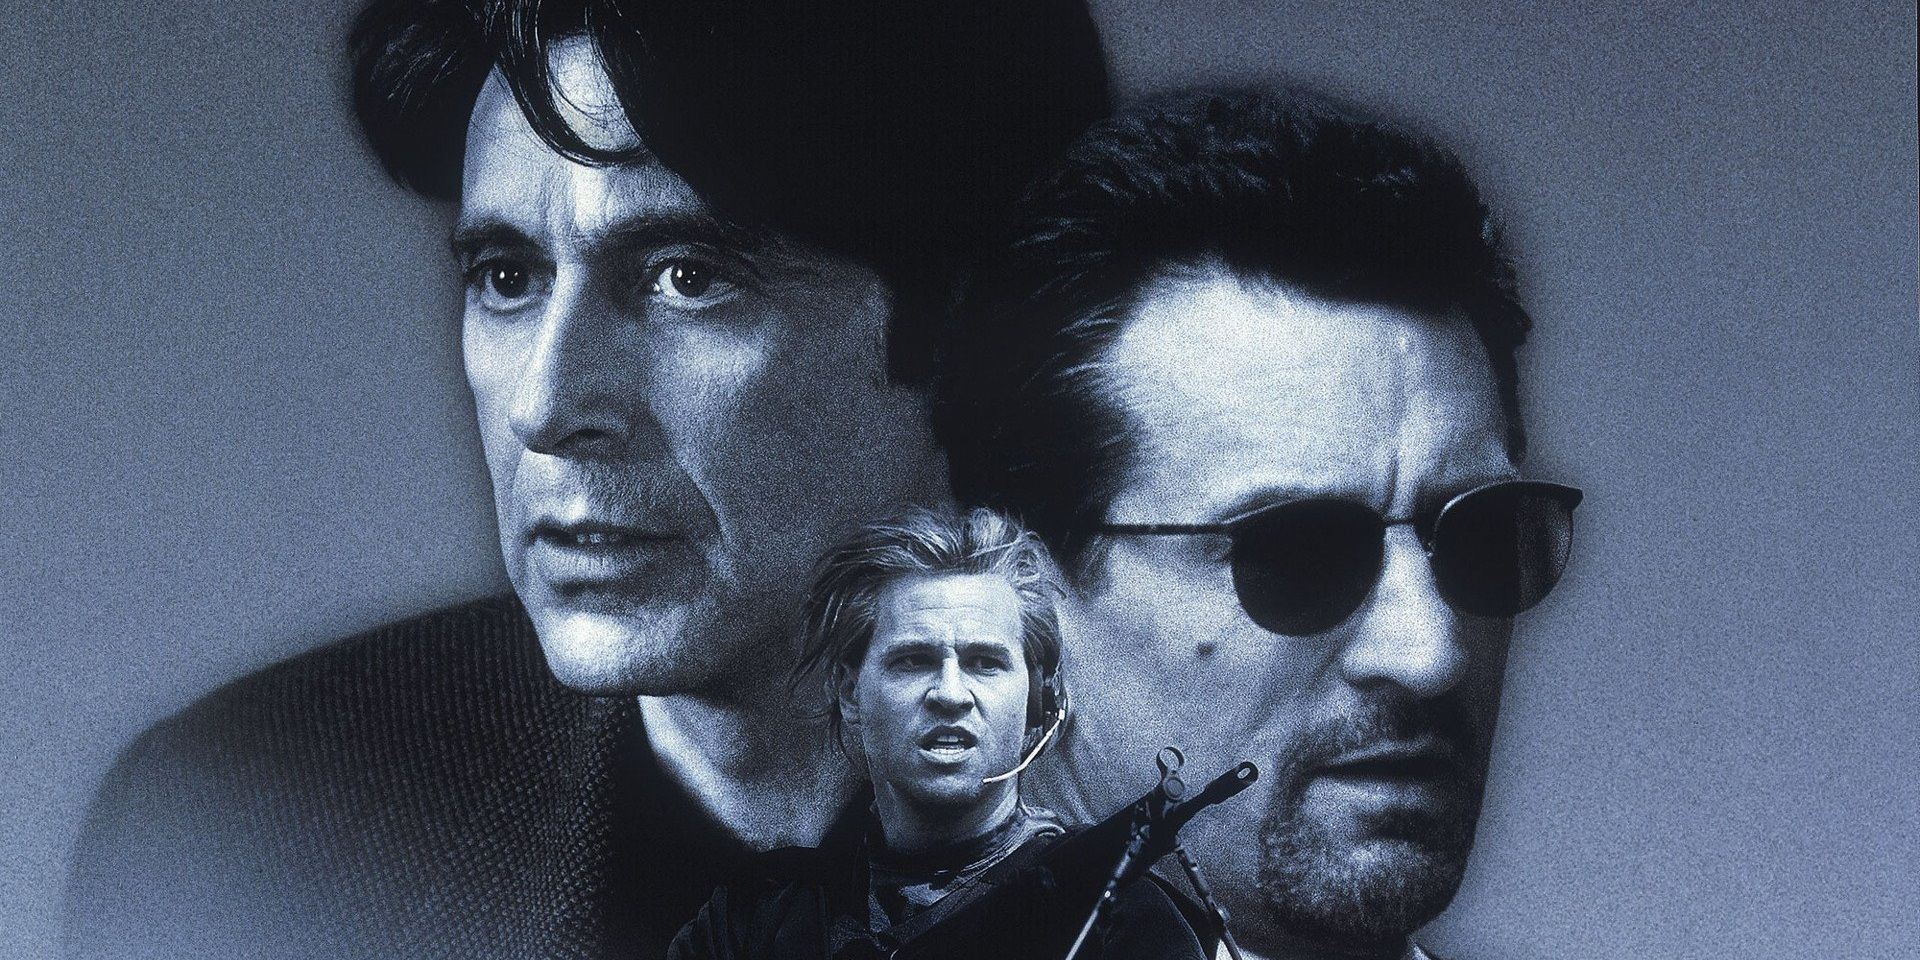 The poster for Heat